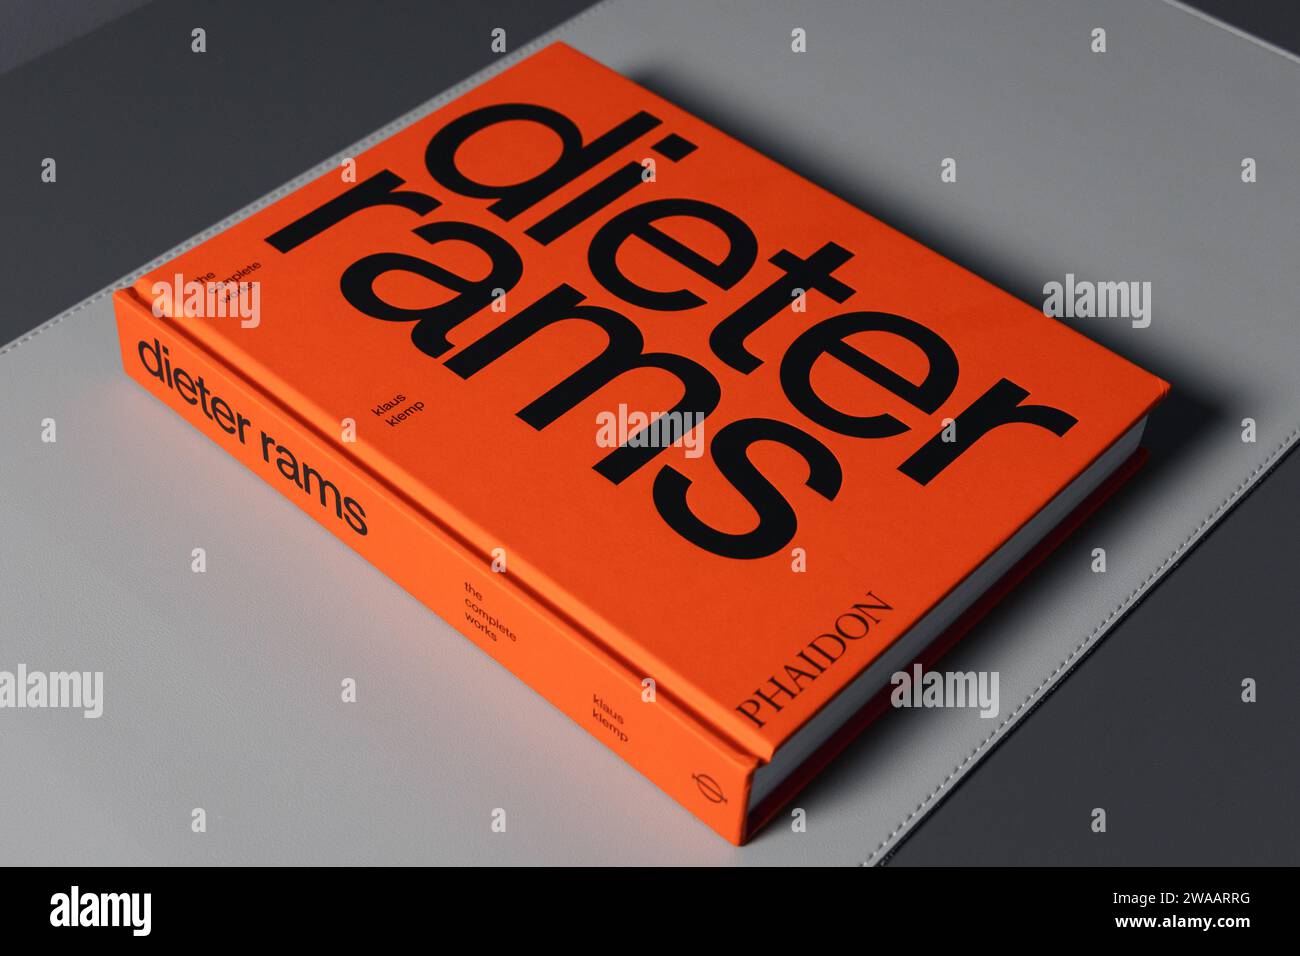 LONDON - DECEMBER 27, 2023: Dieter Rams product design book with bright orange cover Stock Photo